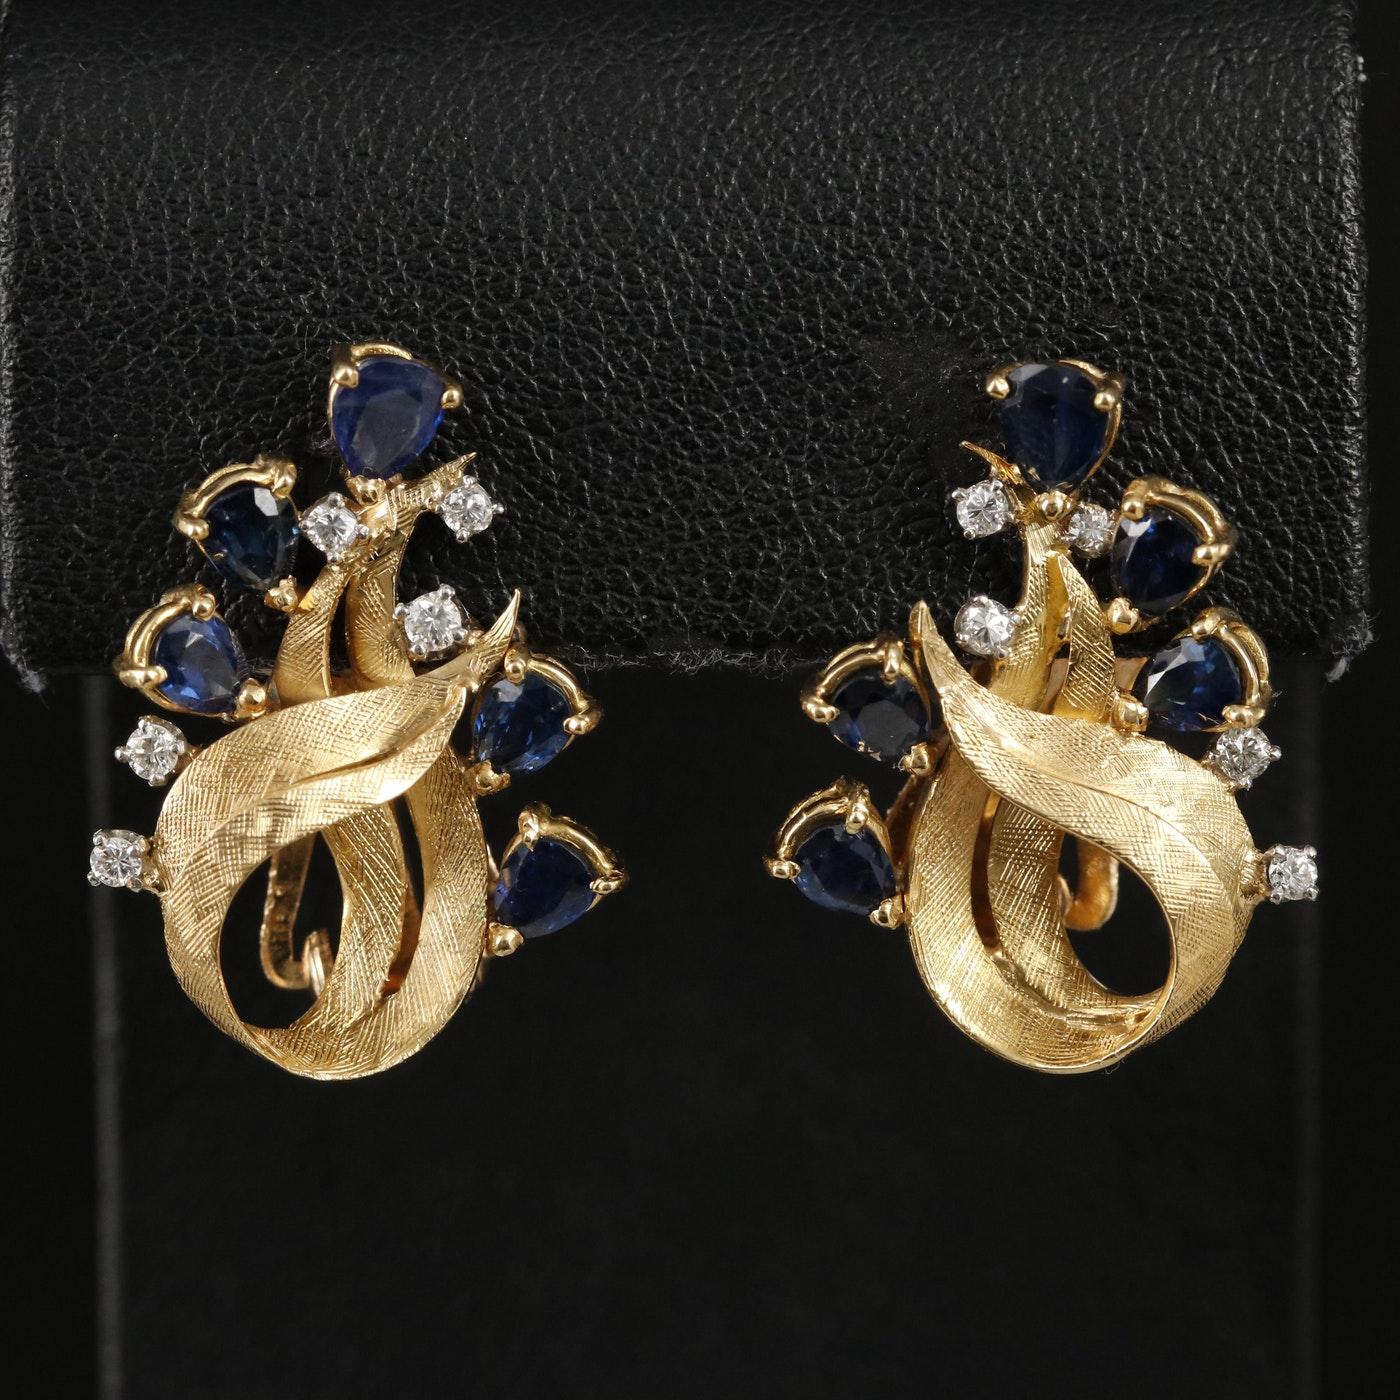 Mint Vintage Condition

Materials:	14K Gold, Palladium
Earring Type:	Non-Pierced, Drop
Earring Closure Type:	Clip-On
Hallmarks:	14K
Total Weight (grams):	10.70
 	 
Primary Stone(s) Type:	Sapphire
Primary Stone(s) Shape:	Pear, Faceted
Primary